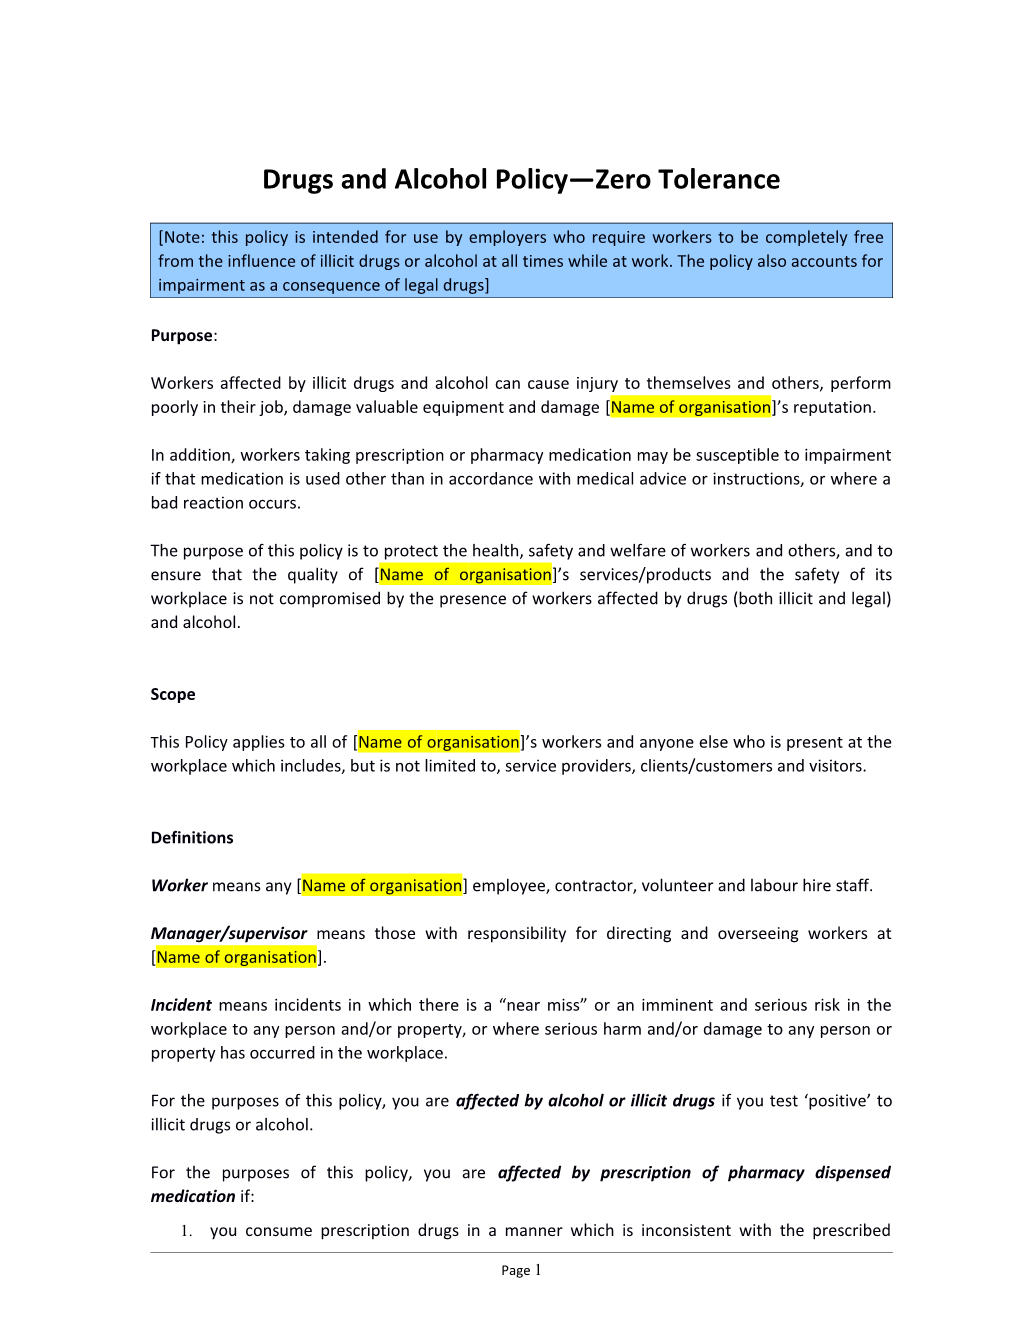 Drugs and Alcohol Policy Zero Tolerance